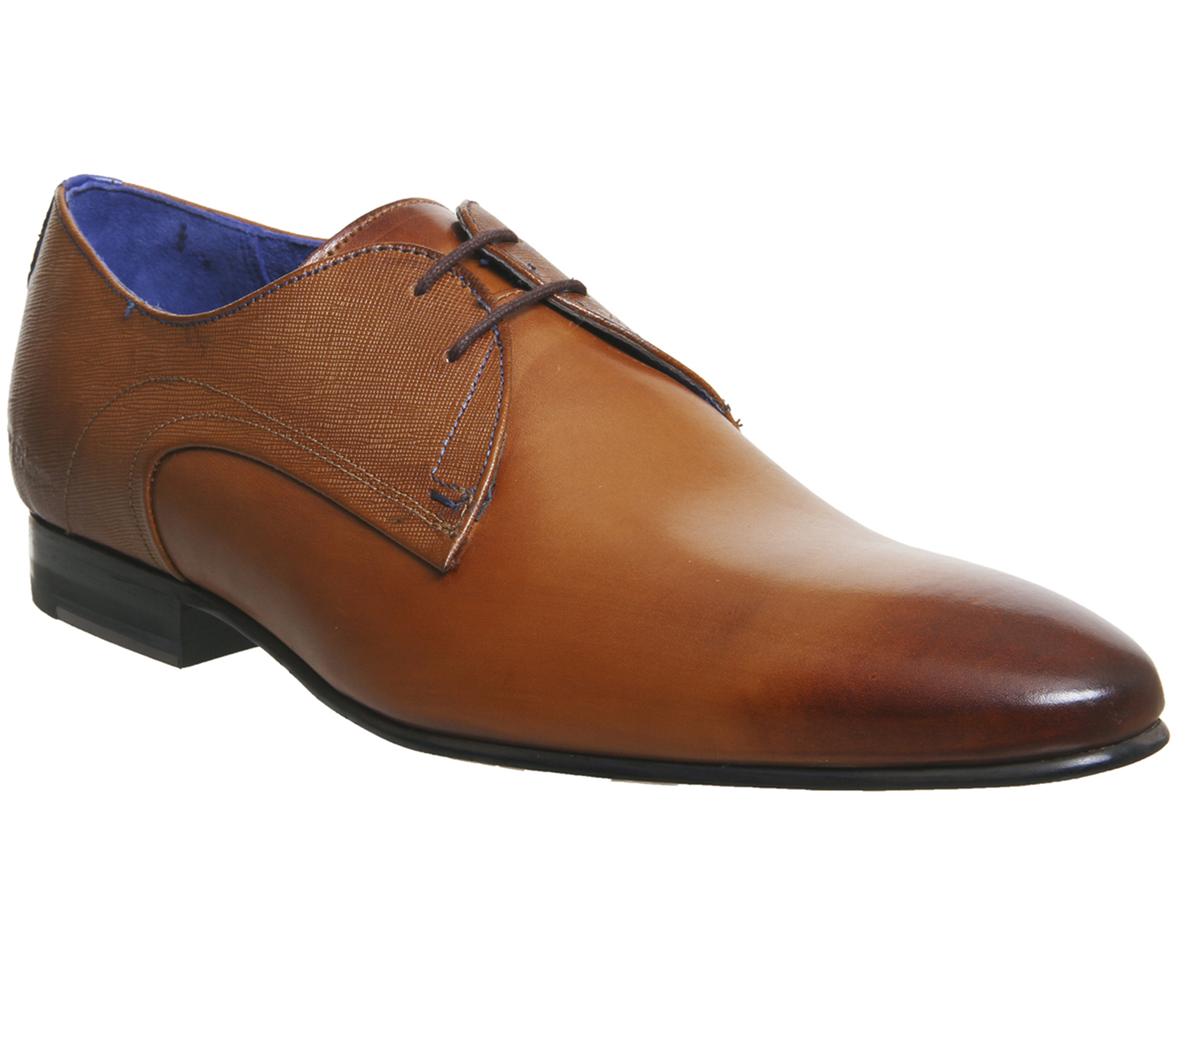 Ted Baker Peair Lace Up Shoes Tan 